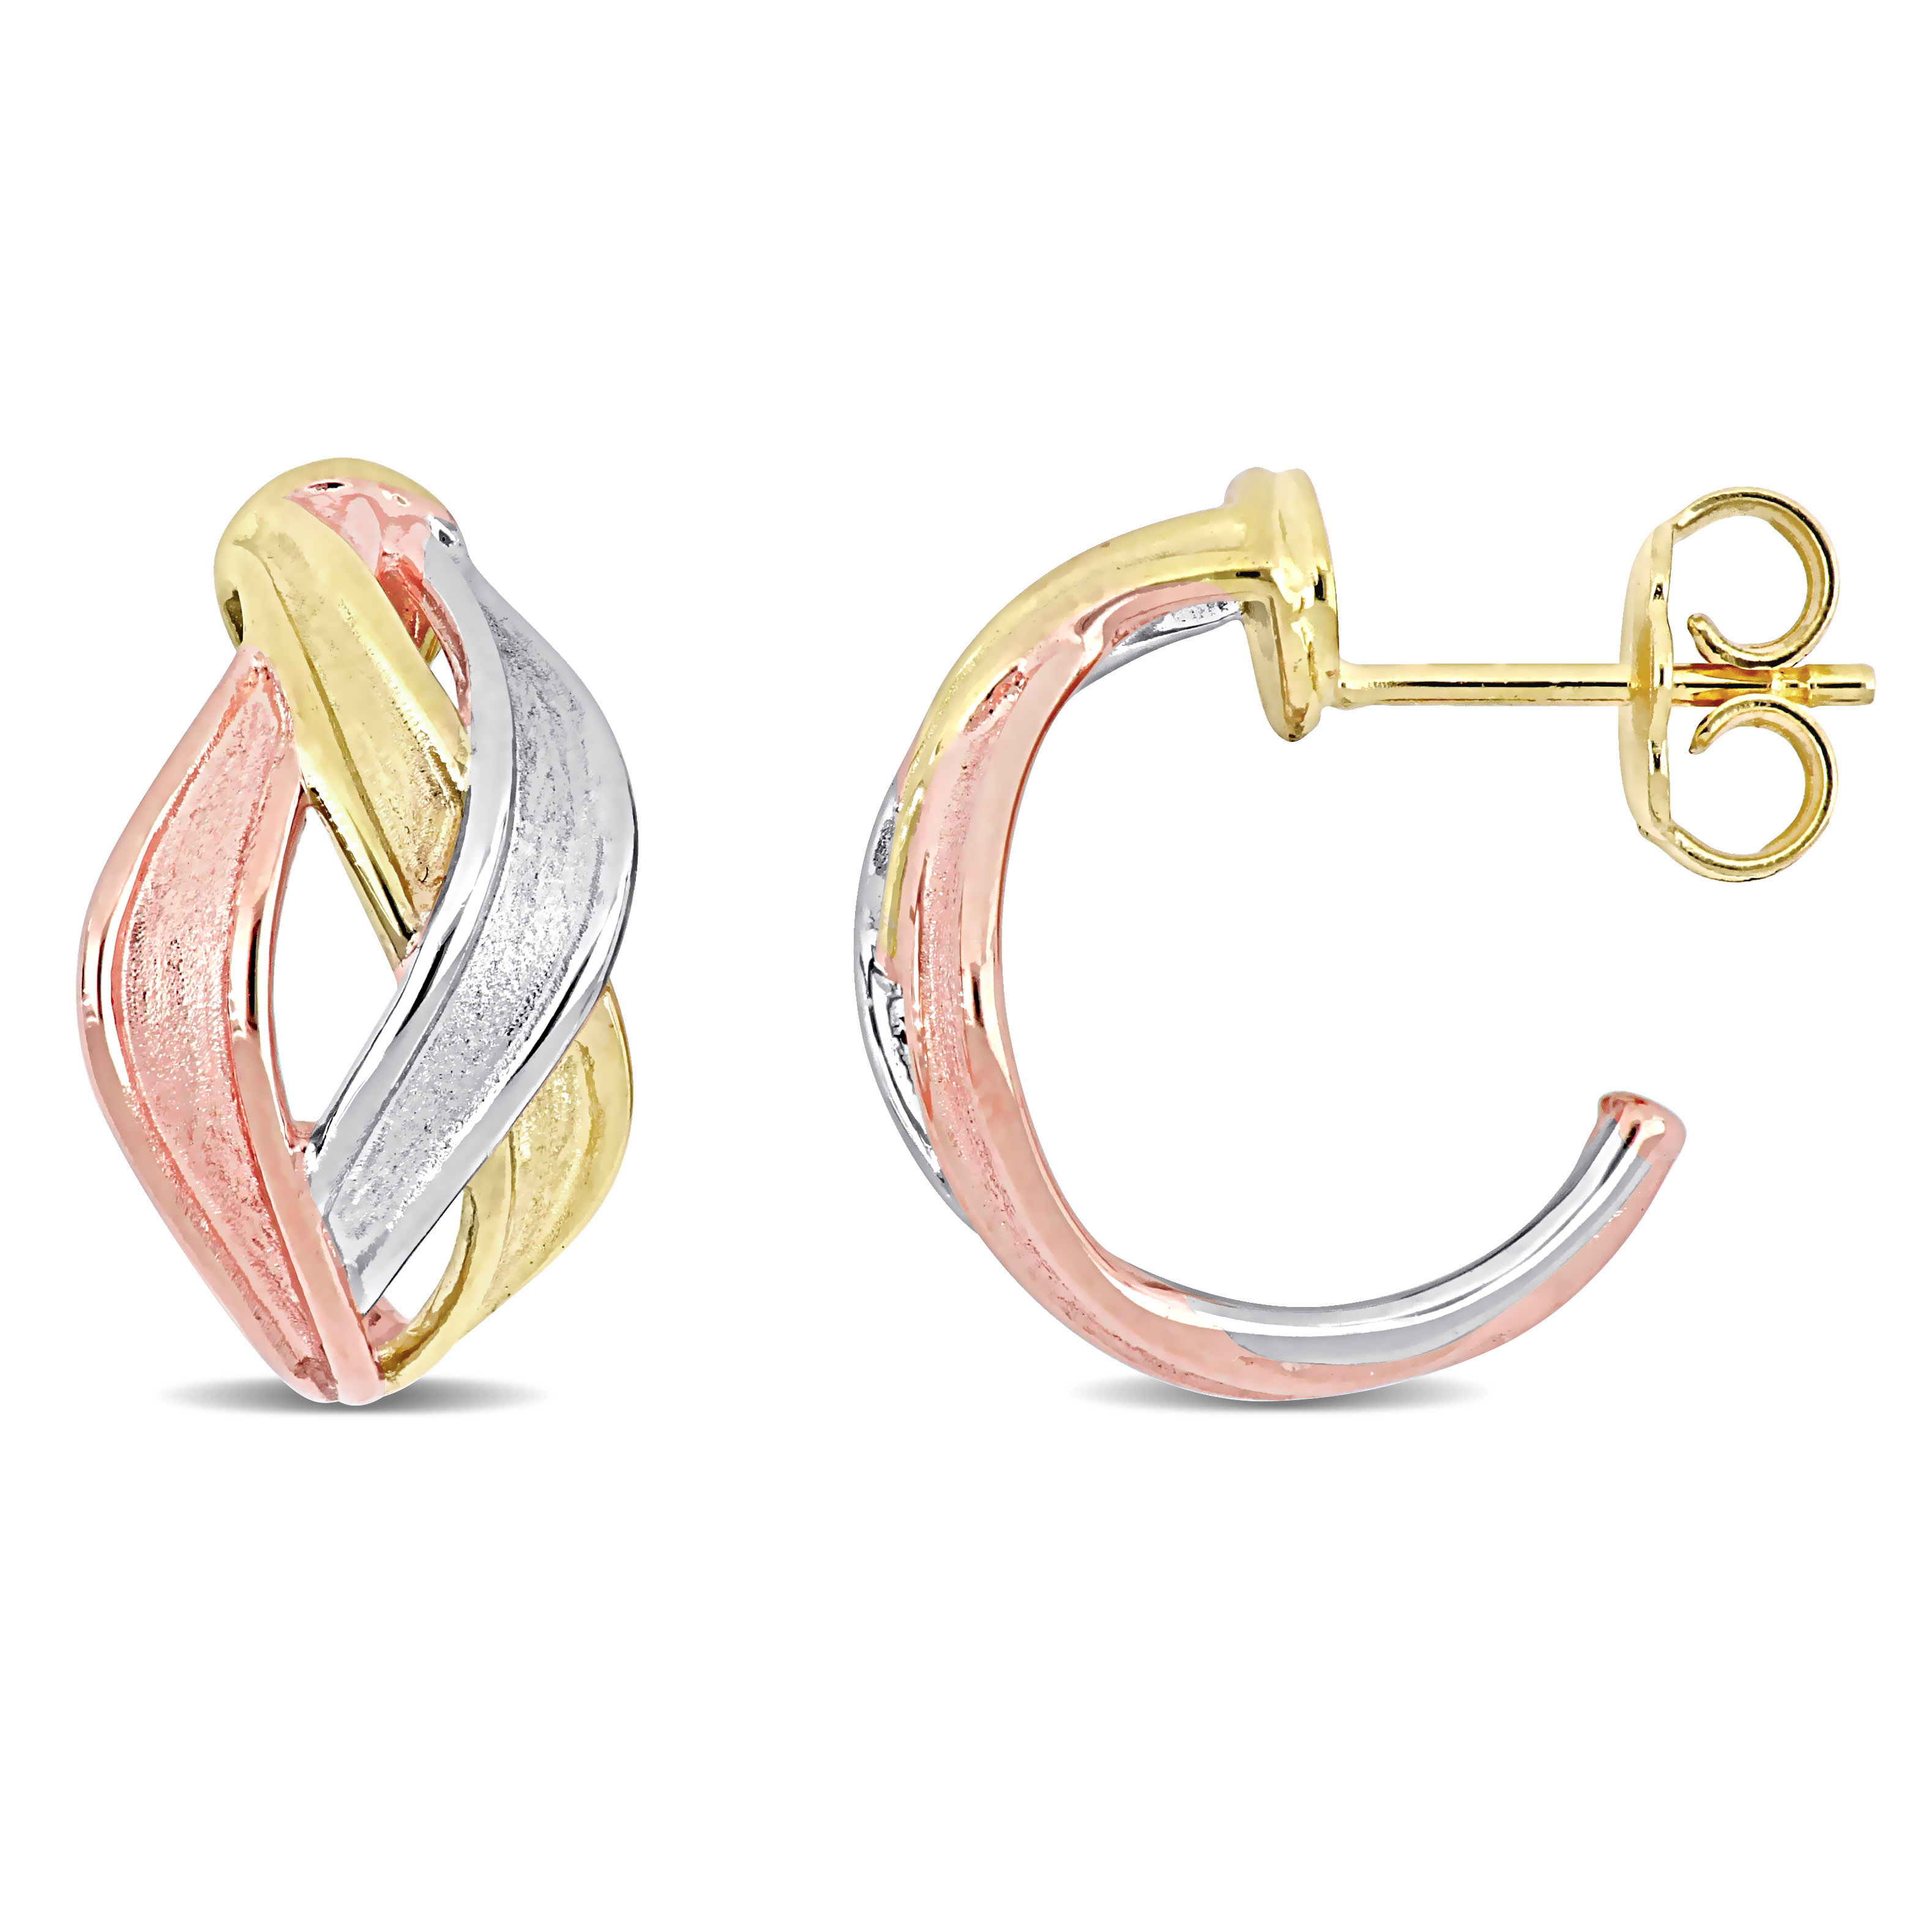 Swirl Earrings in 3-Tone 18k Yellow, Rose and White Gold